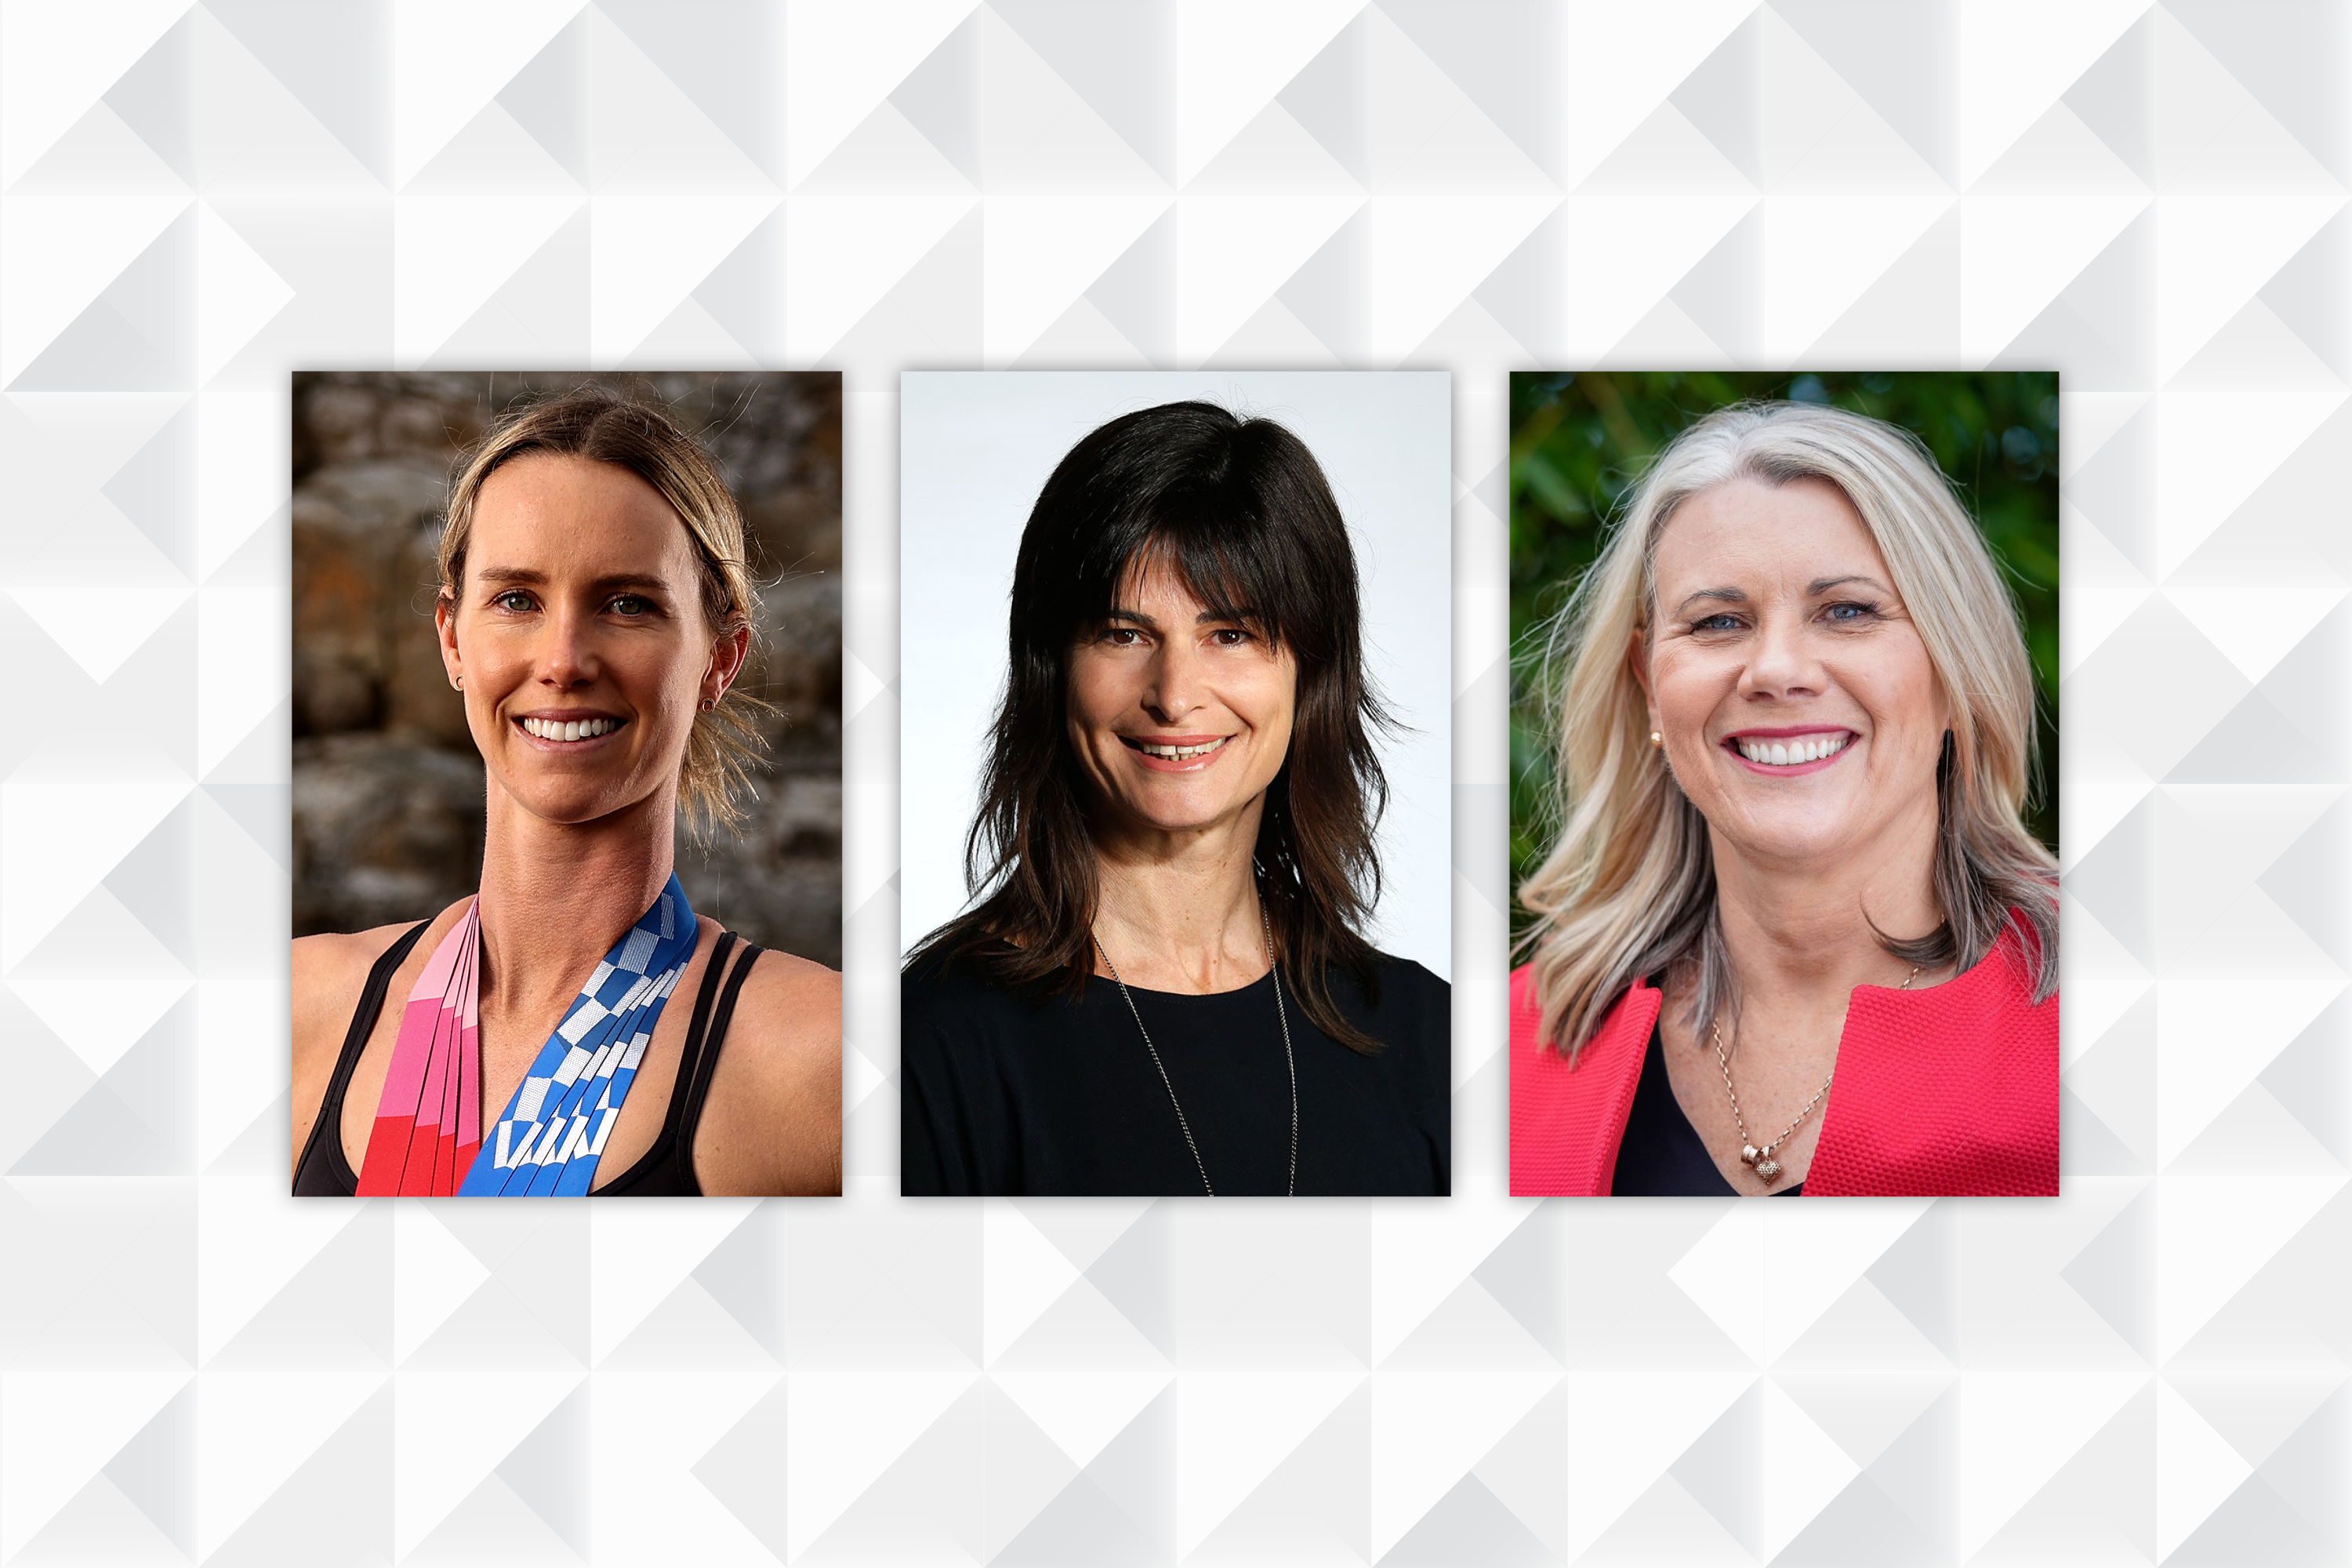 A Better Future for All - The Rise and Rise of Women in Sport: Kerry O'Brien in conversation with Emma McKeon AM, Kathryn Harby-Williams AM and Kate Roffey 